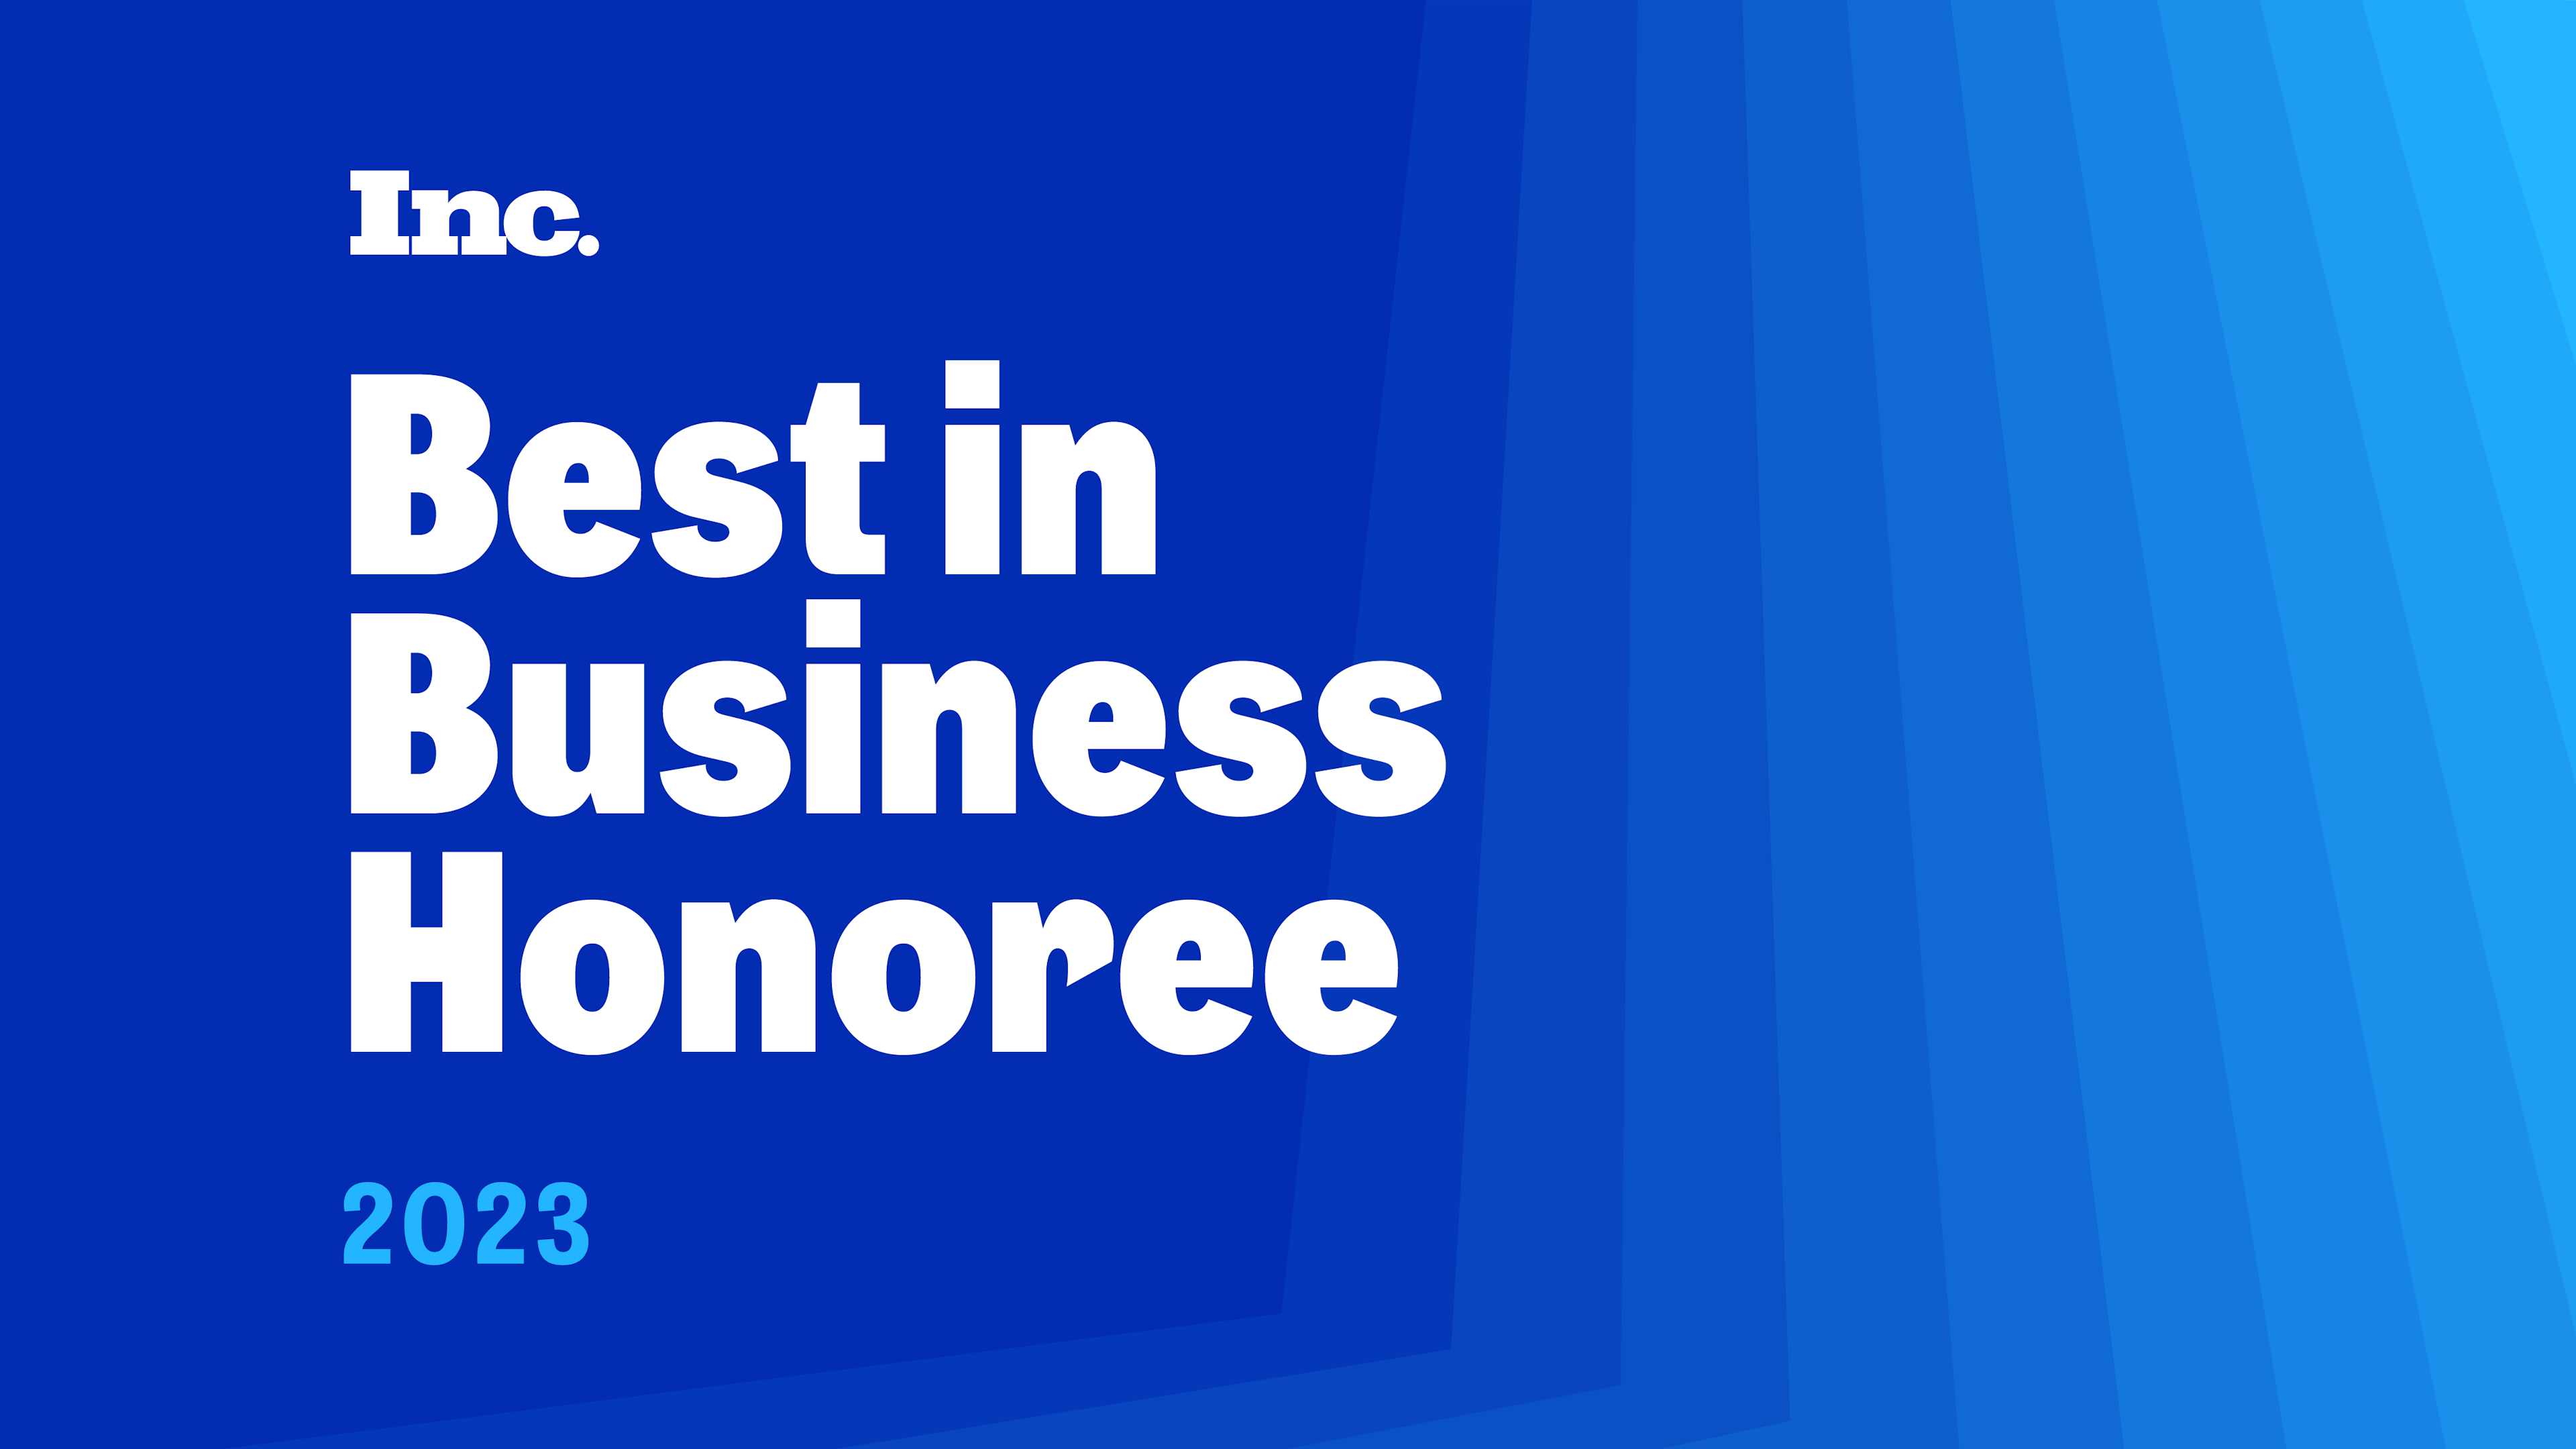 Best in business honoree 2023 award